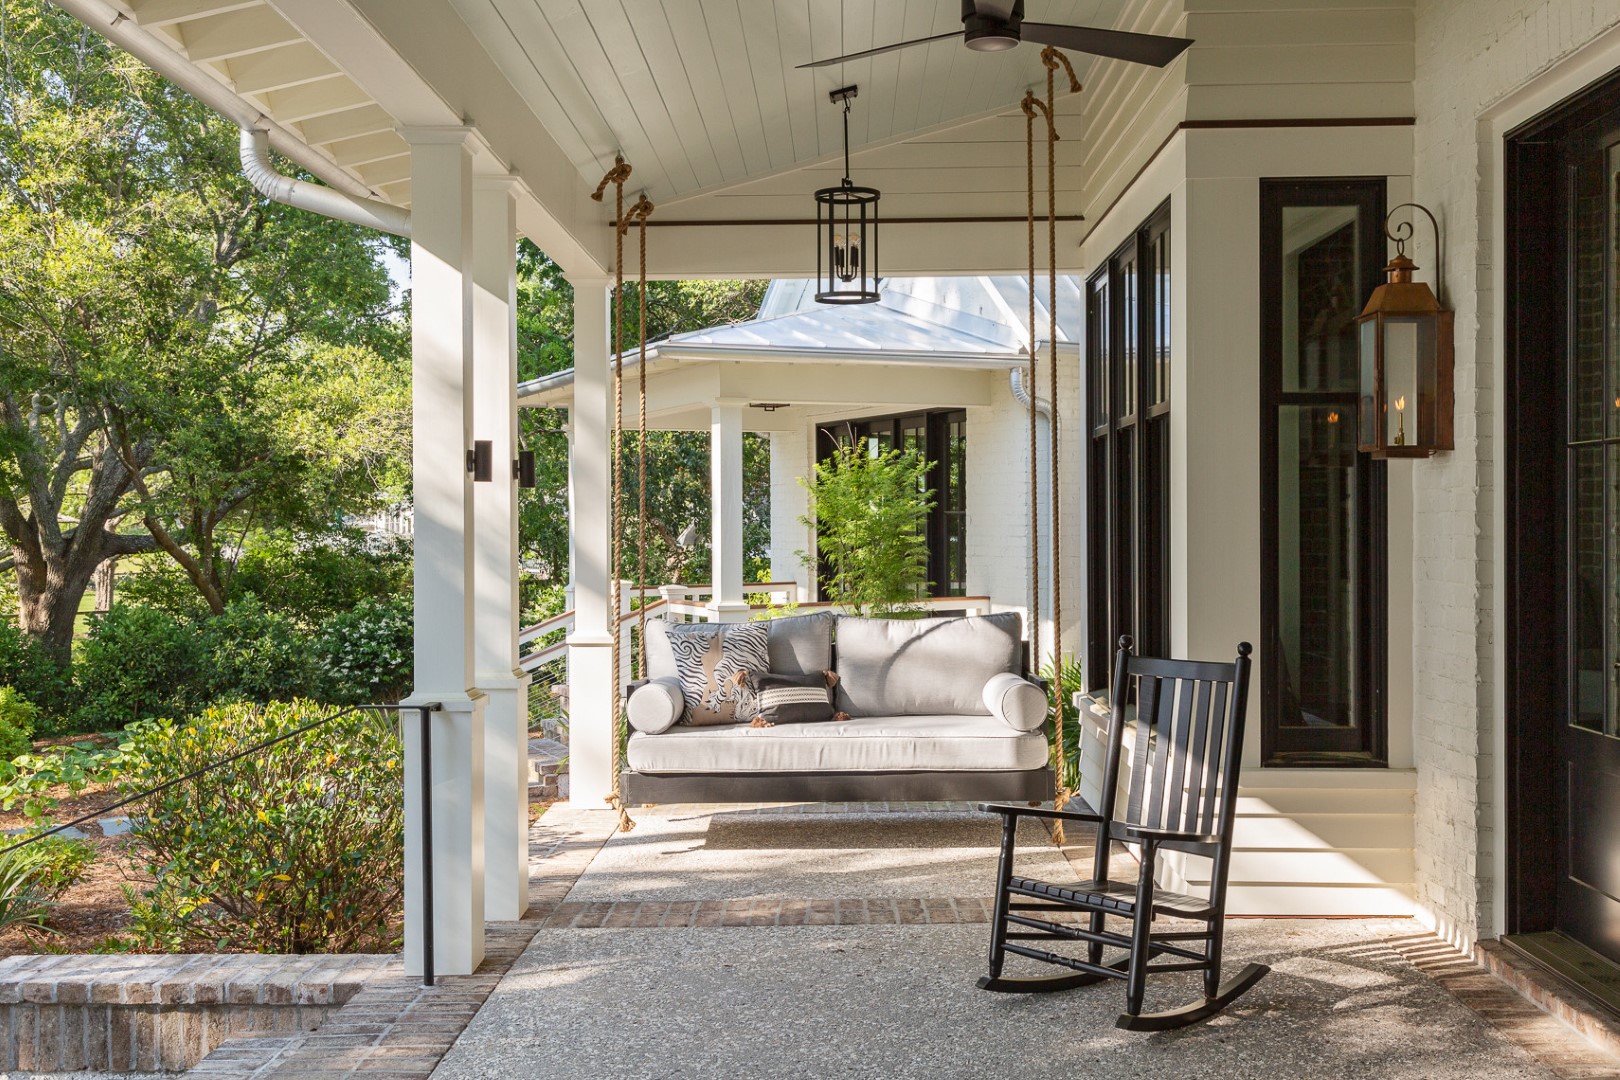 18 Transitional Porch Designs to Bridge Indoor and Outdoor Living Spaces